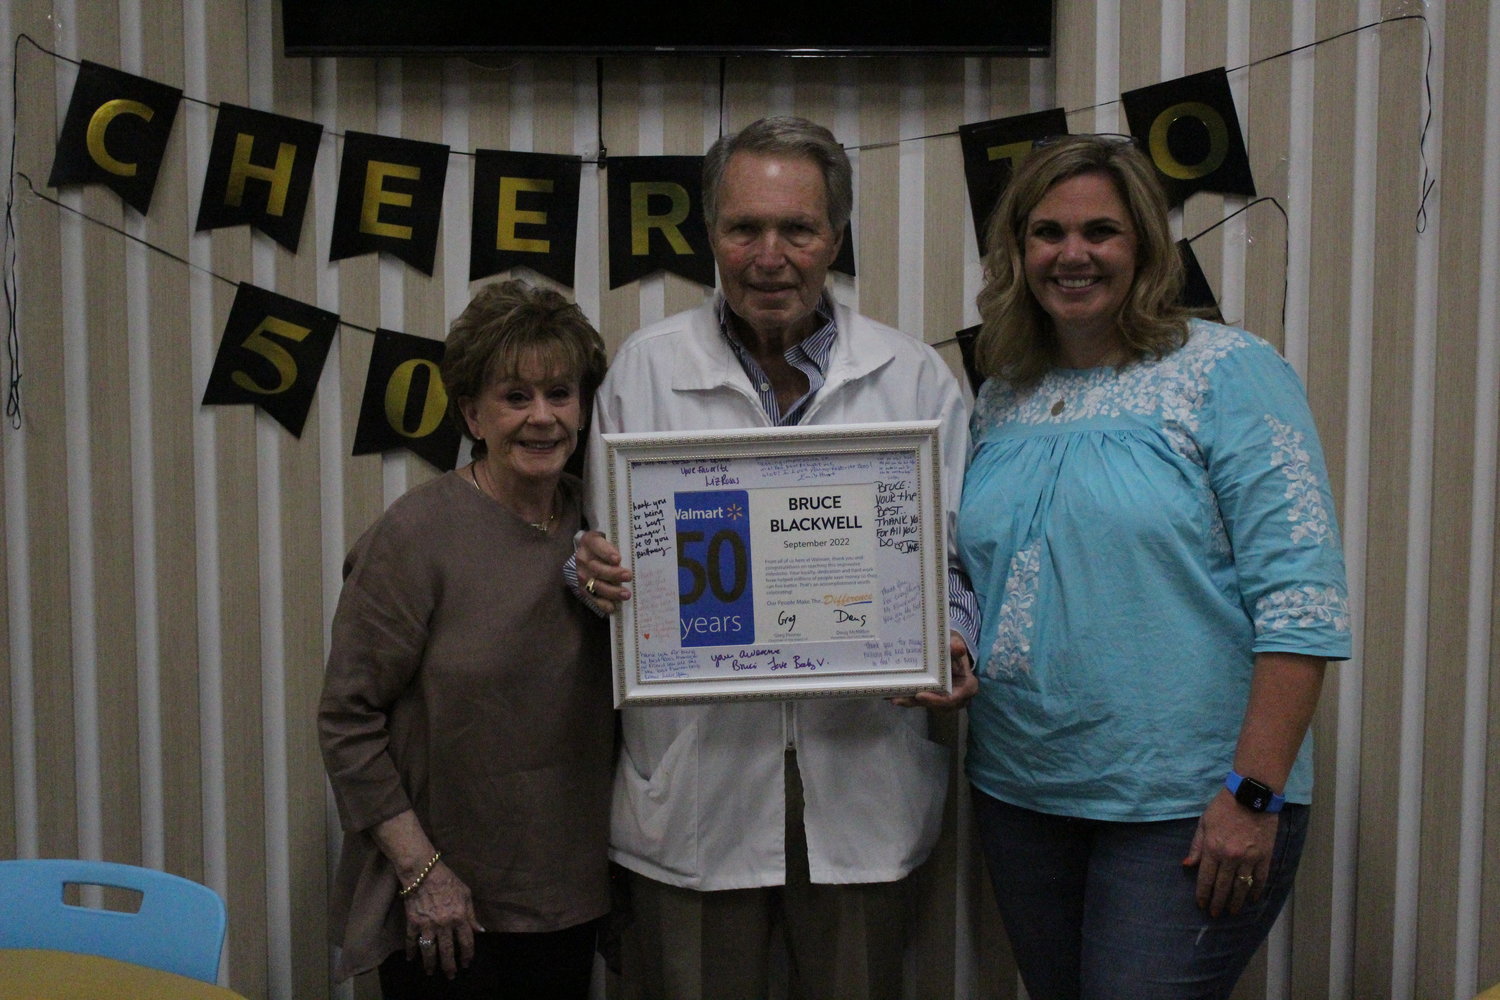 Gonzales’s Walmart Pharmacist Manager Bruce Blackwell (middle) with his wife, Wanette Blackwell (left) and daughter, Brittany DeBerry, as he holds his 50 year plaque.